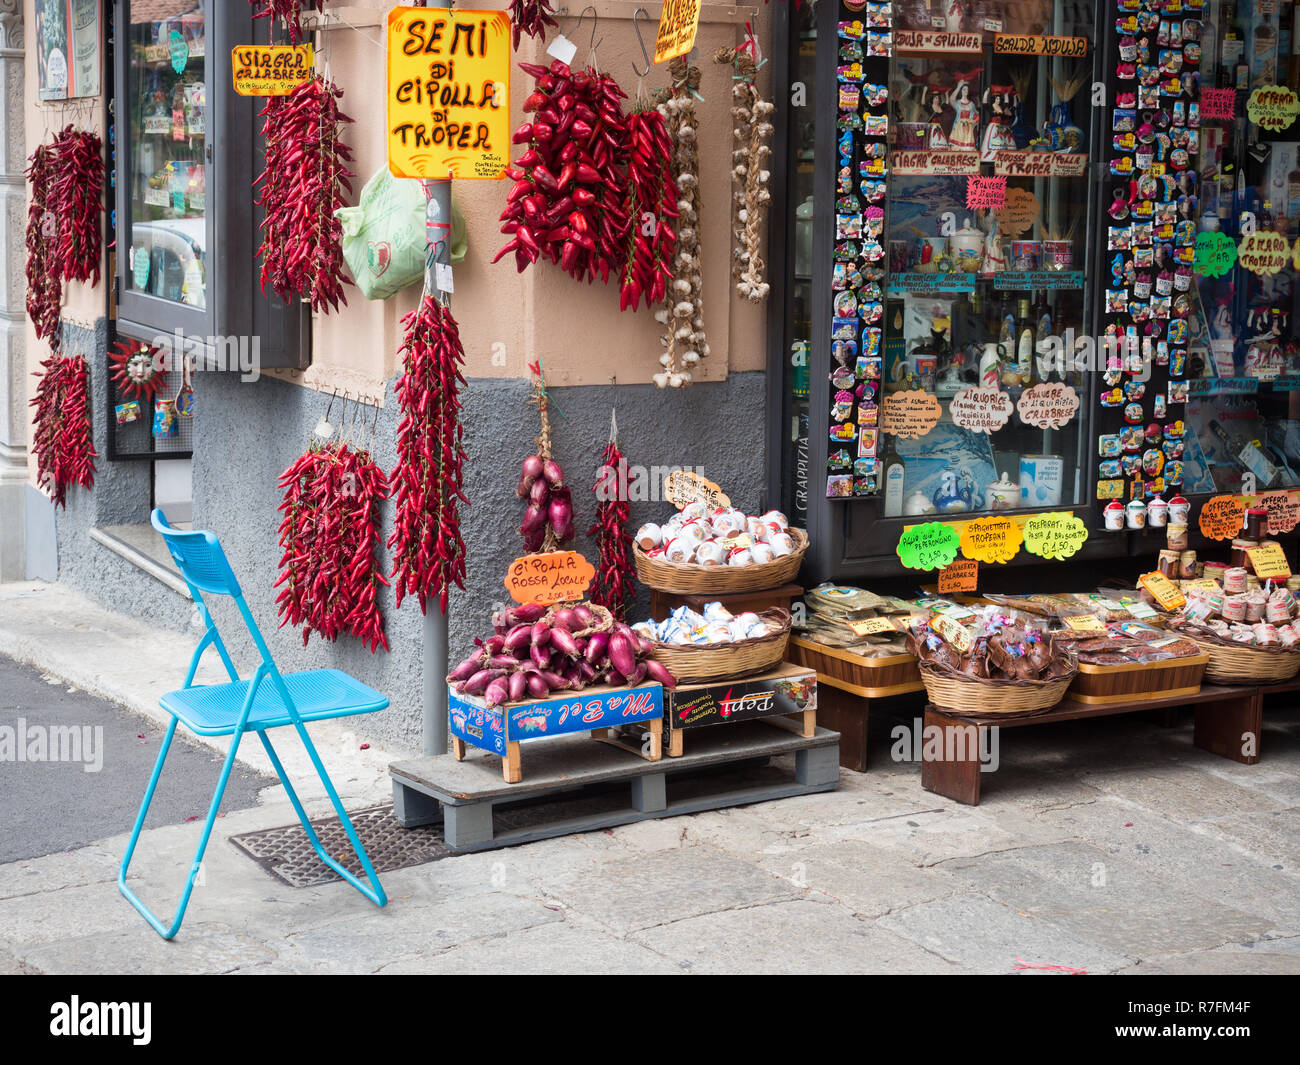 Tropea, Italy - August 21, 2018: Typical shops in Tropea where you can buy spicy Calabrian peppers and the famous Tropea onions. Stock Photo